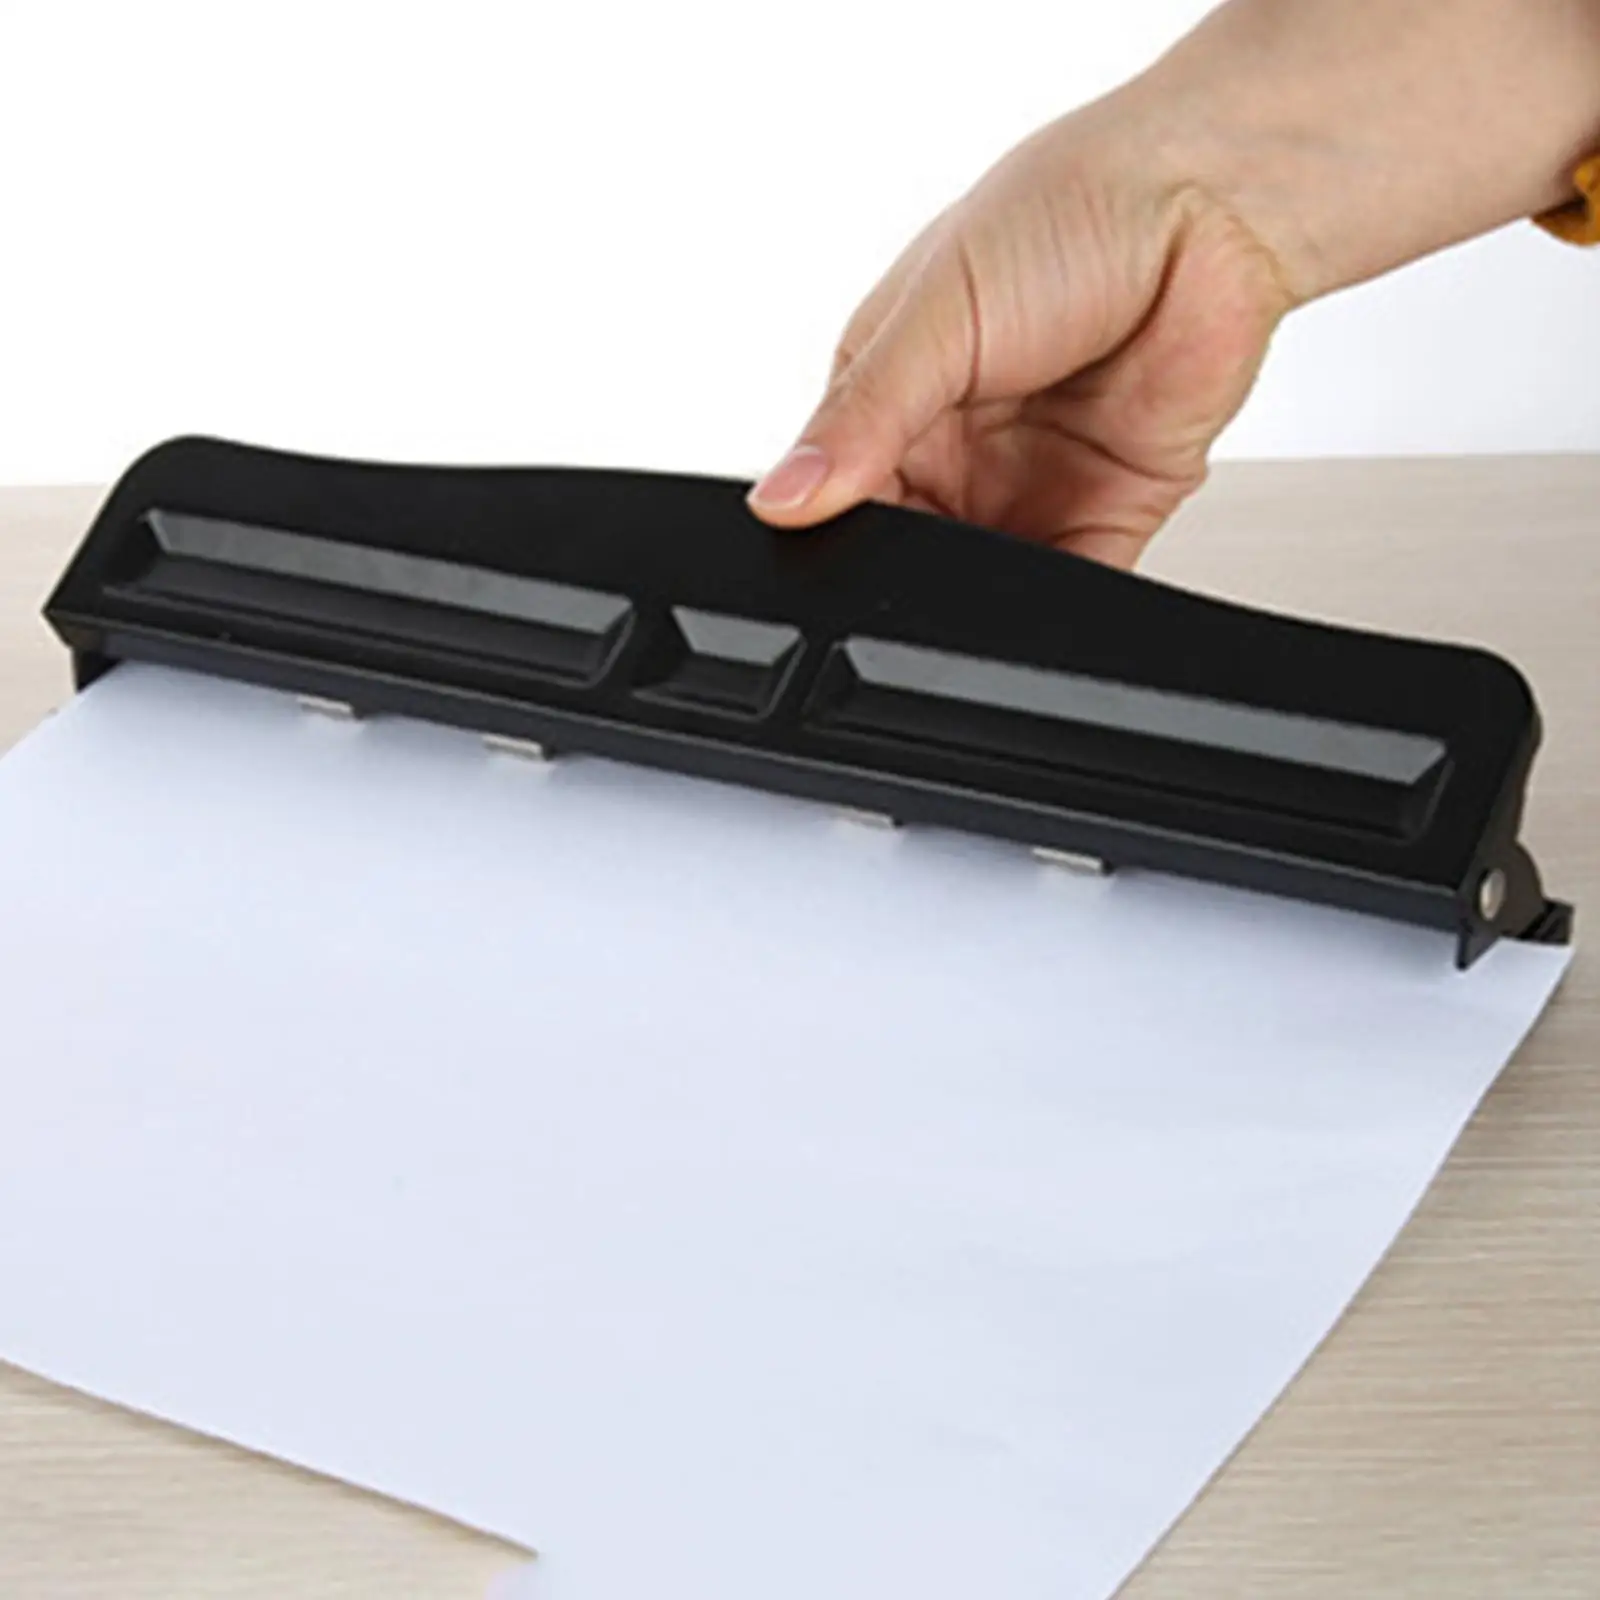 3 Hole Punch Heavy Duty Portable 12 Sheet Paper Capacity Paper Punching Machine for Classroom Office Working Home